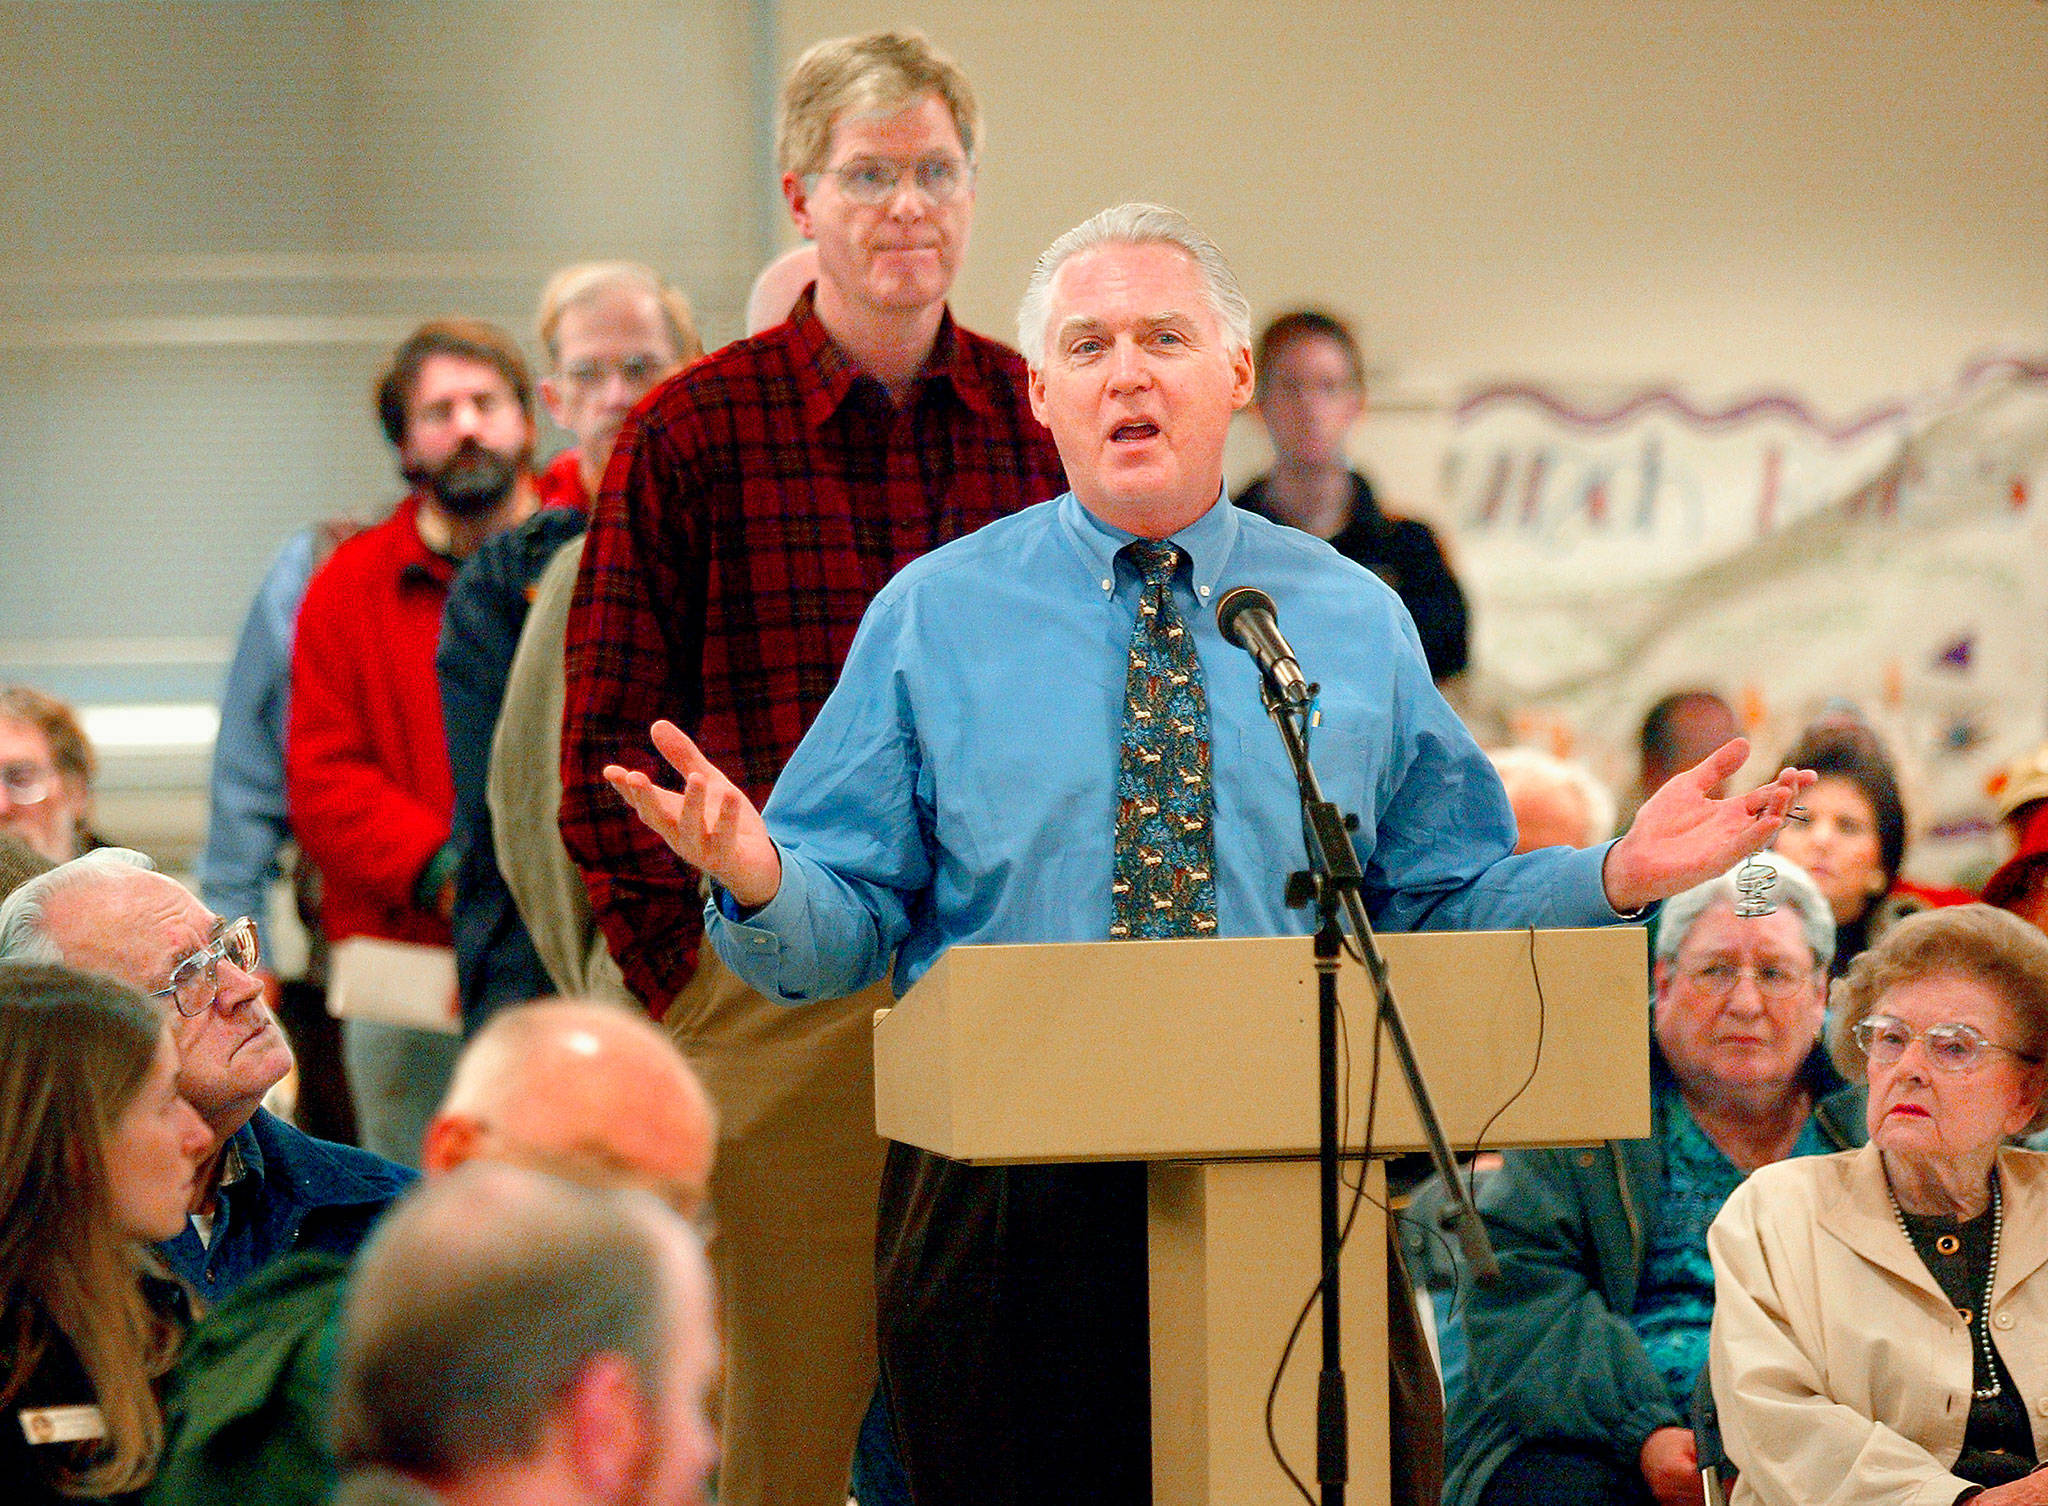 Dr. Scott Casselman speaks out against airport expansion at Paine Field during a 2005 town hall meeting in Mukilteo. Now that commercial airline service has started, the Mukilteo resident hasn’t changed his views. (Dan Bates / The Herald)